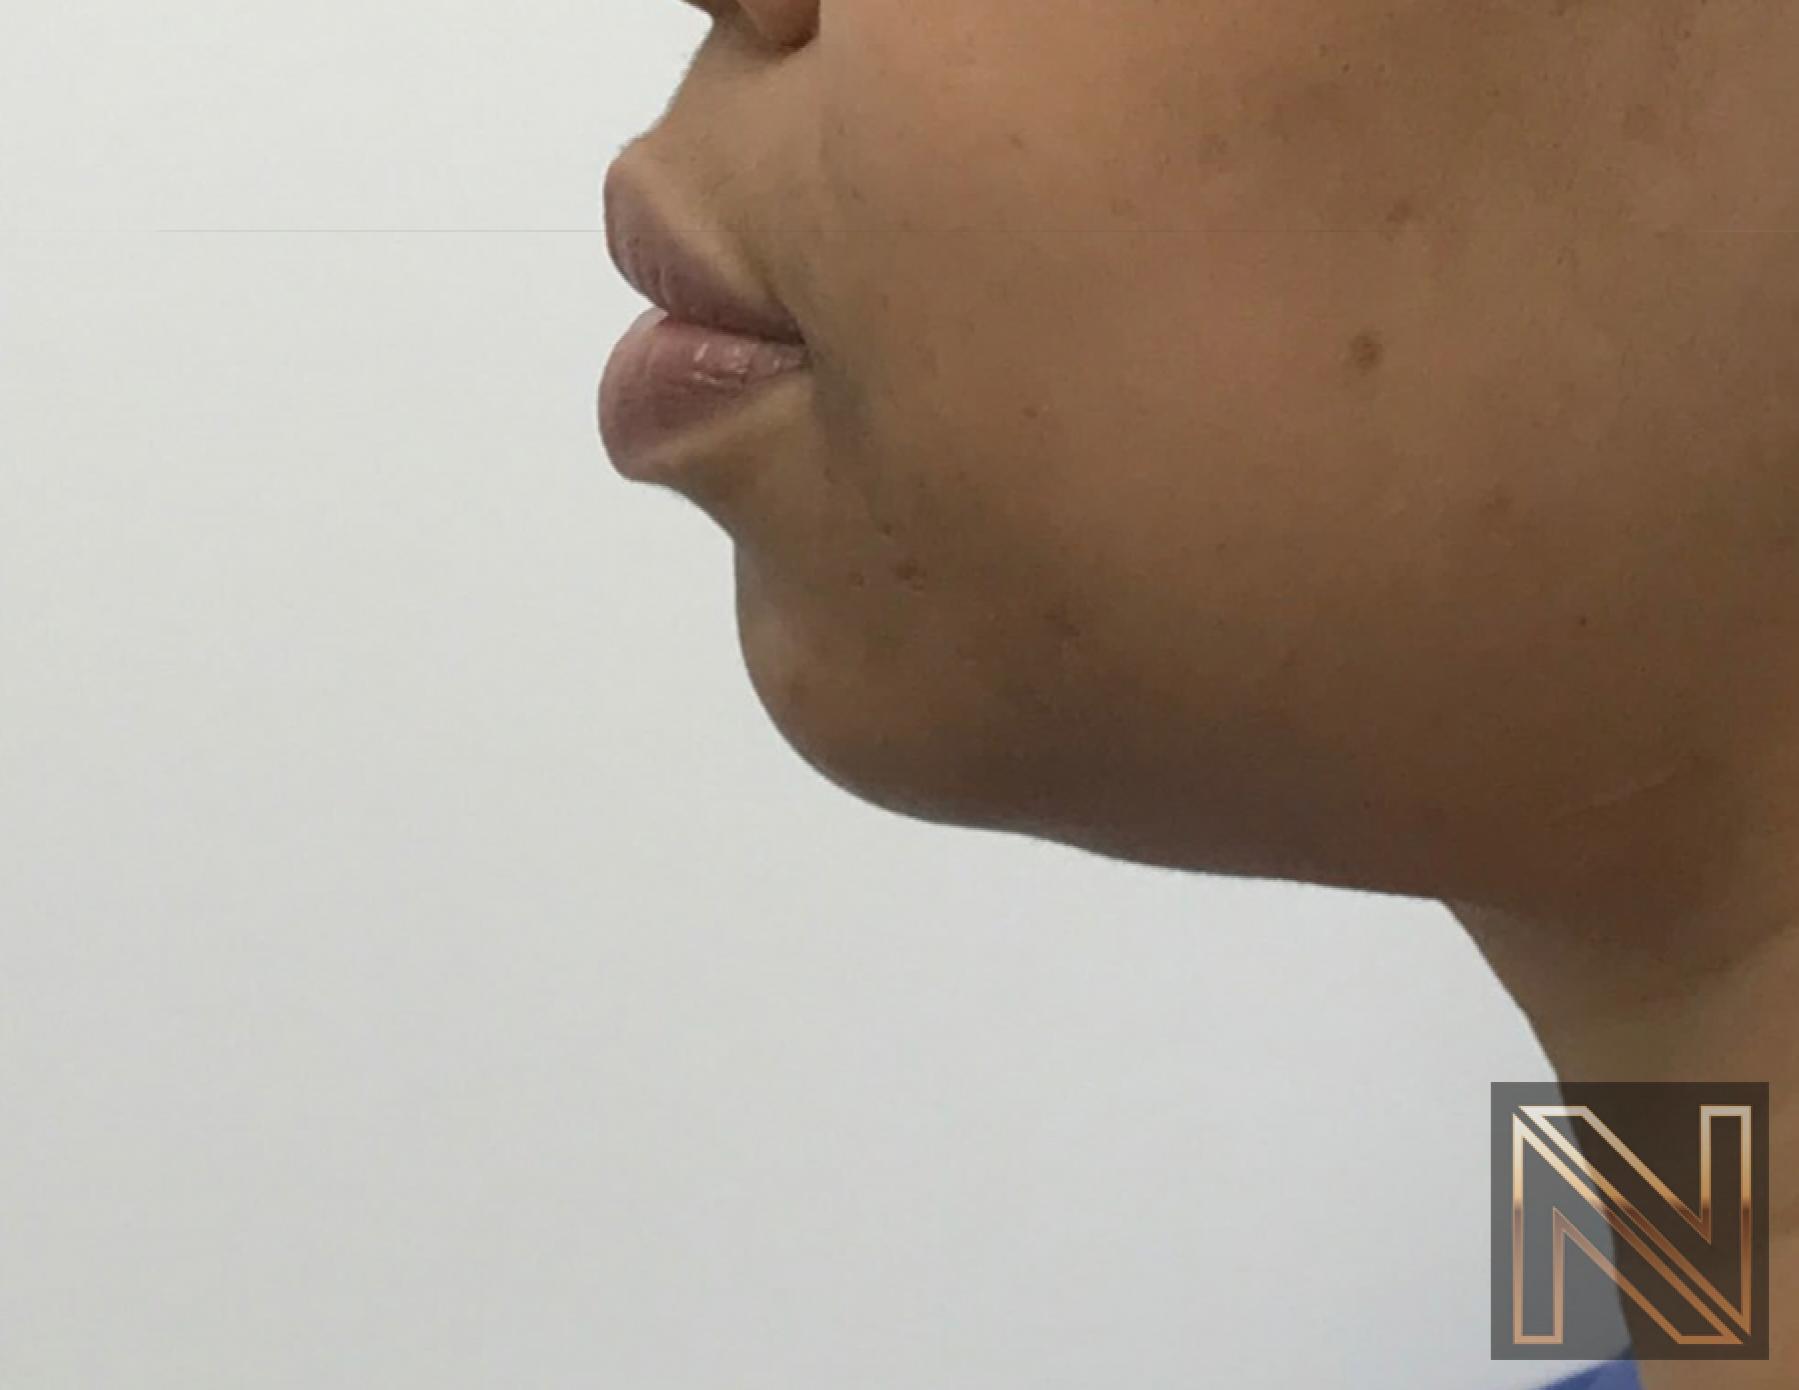 Chin Augmentation: Patient 3 - Before and After 5